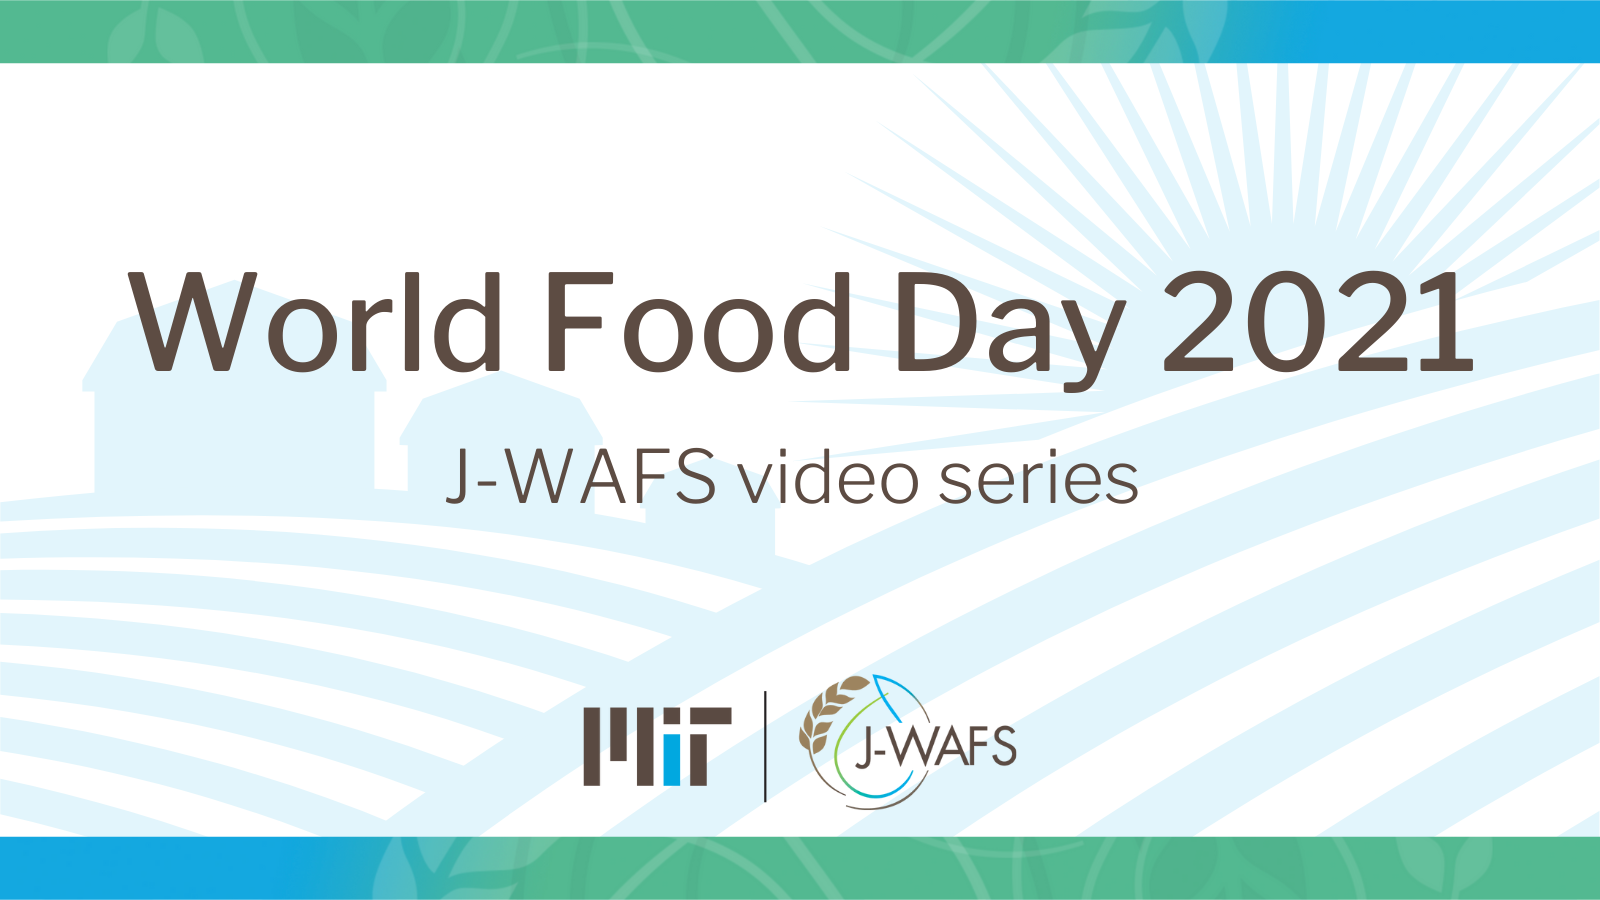 World Food Day 2021 Graphic with J-WAFS logo and watermark of a farm with agricultural fields in background